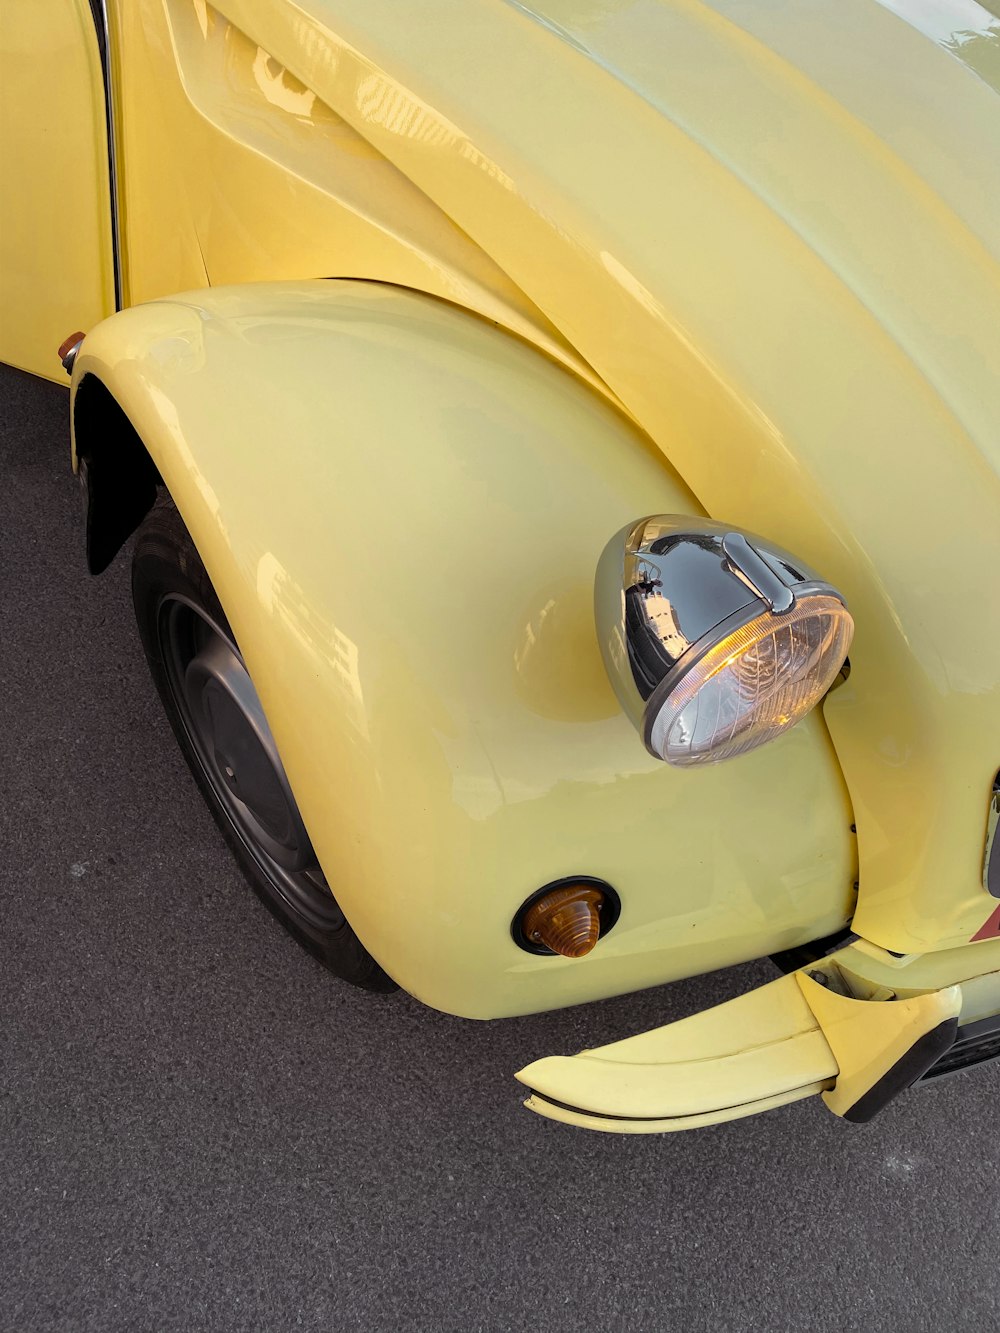 a close up of the front end of a yellow car